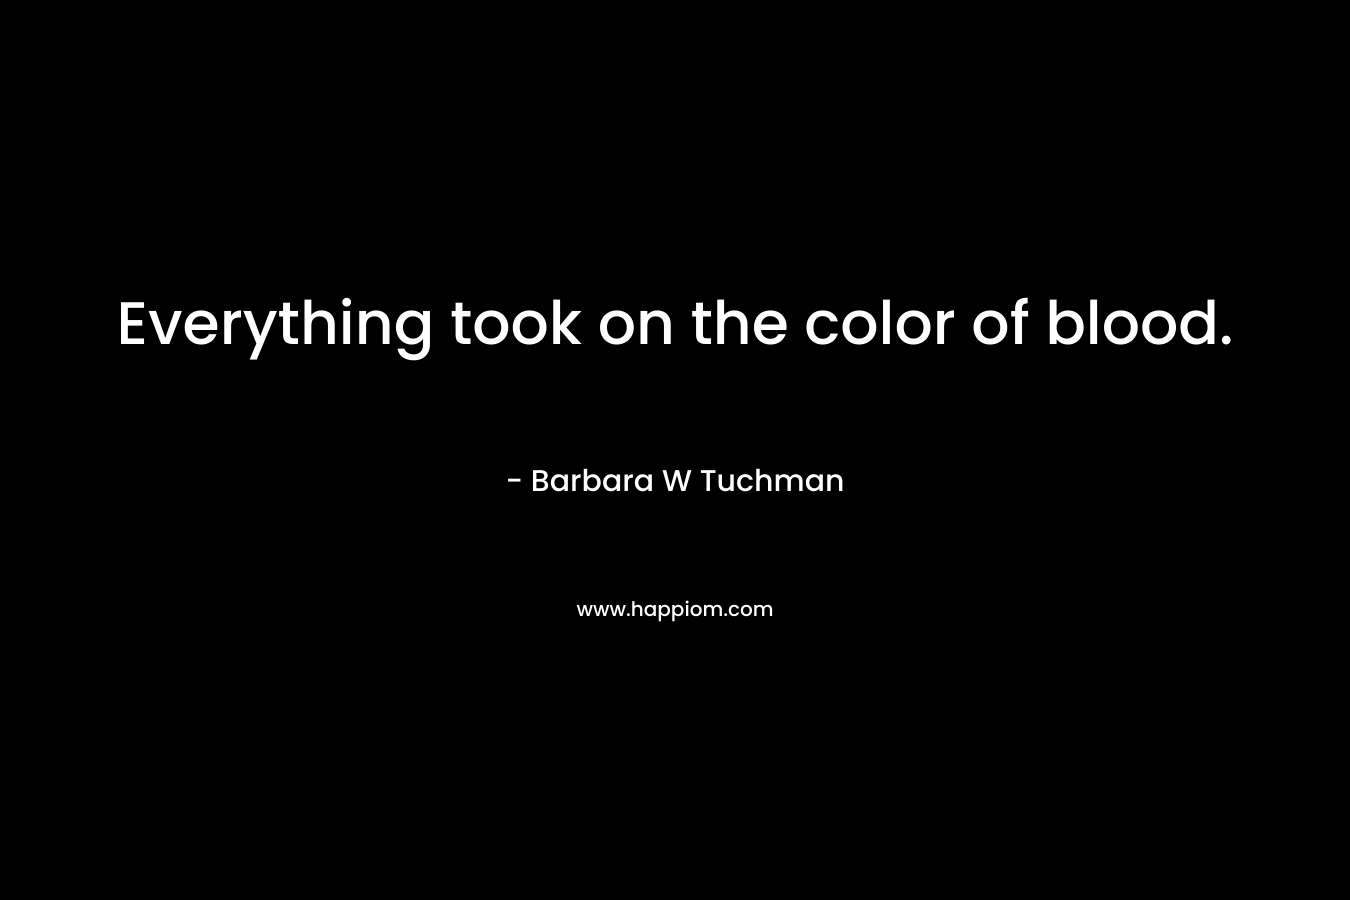 Everything took on the color of blood.